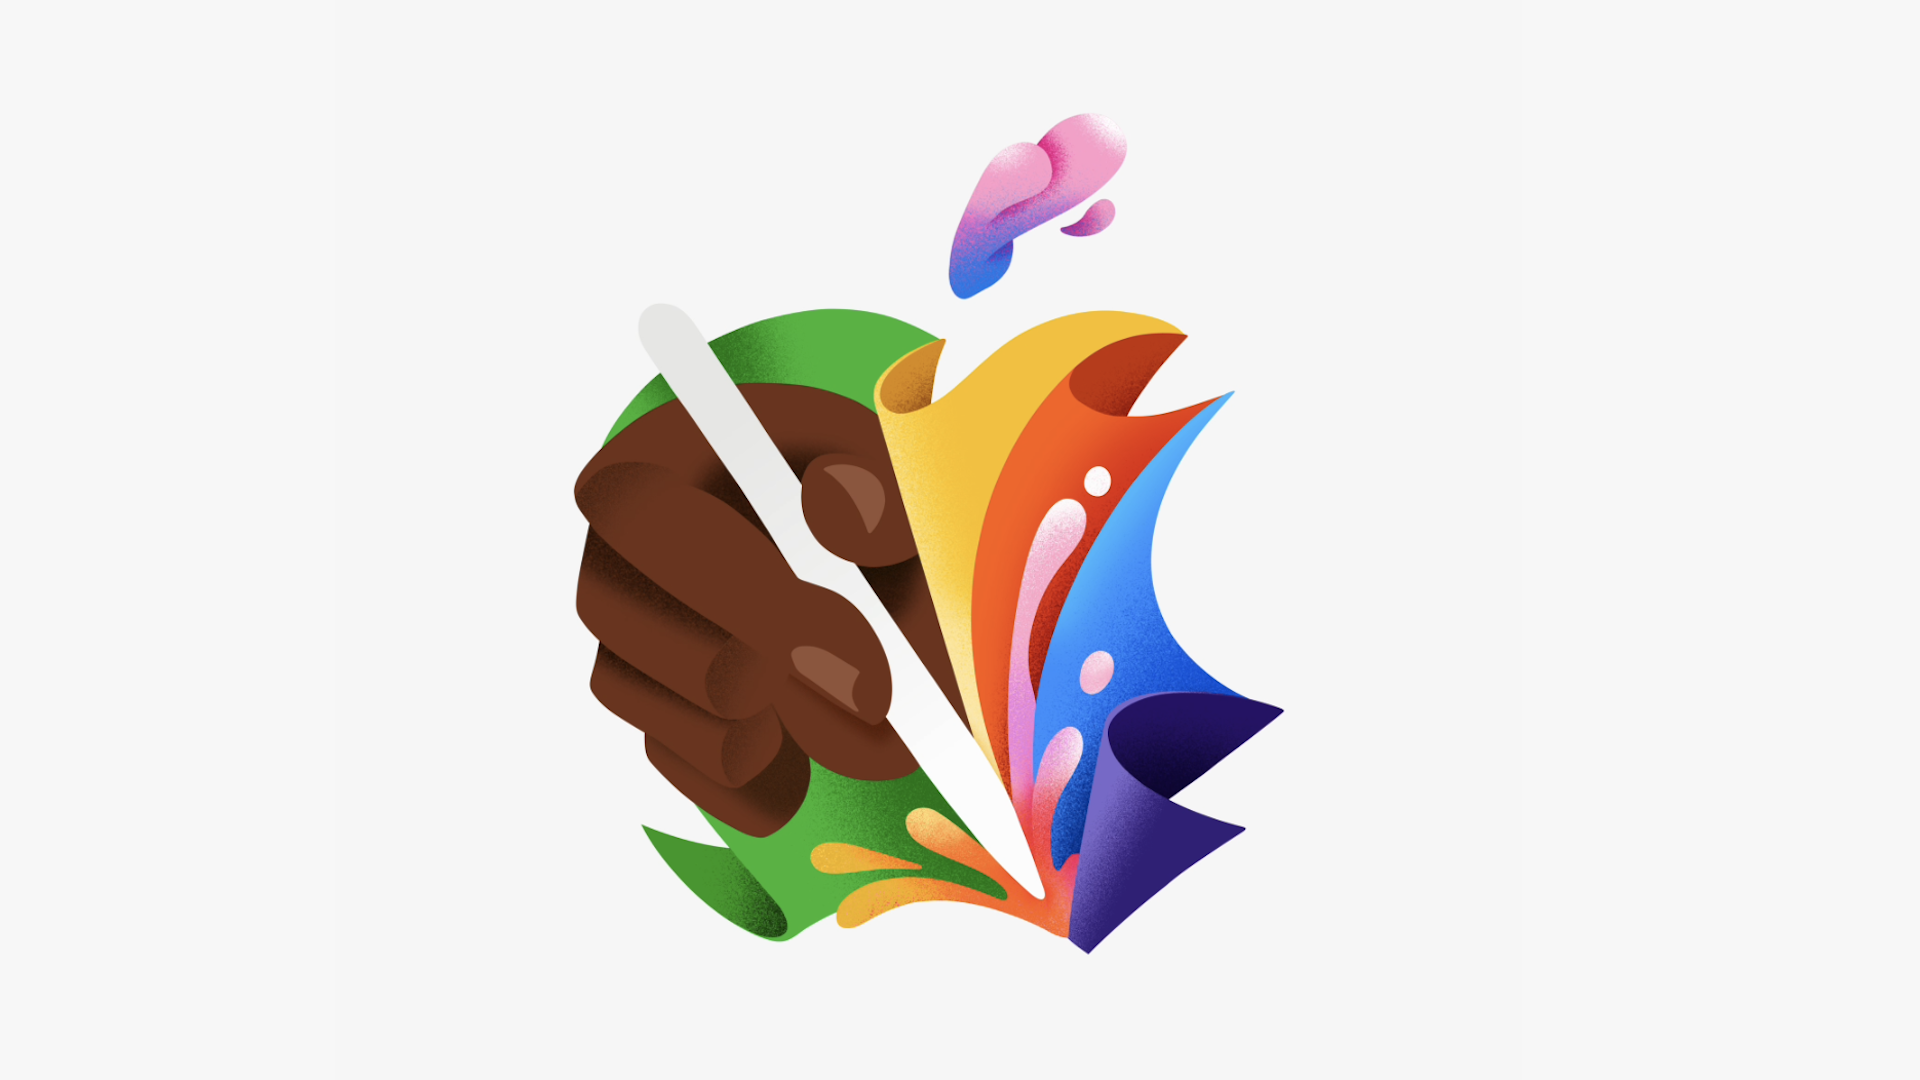 Apple's graphic design for the May event, featuring an Apple Pencil worked into the Apple logo.